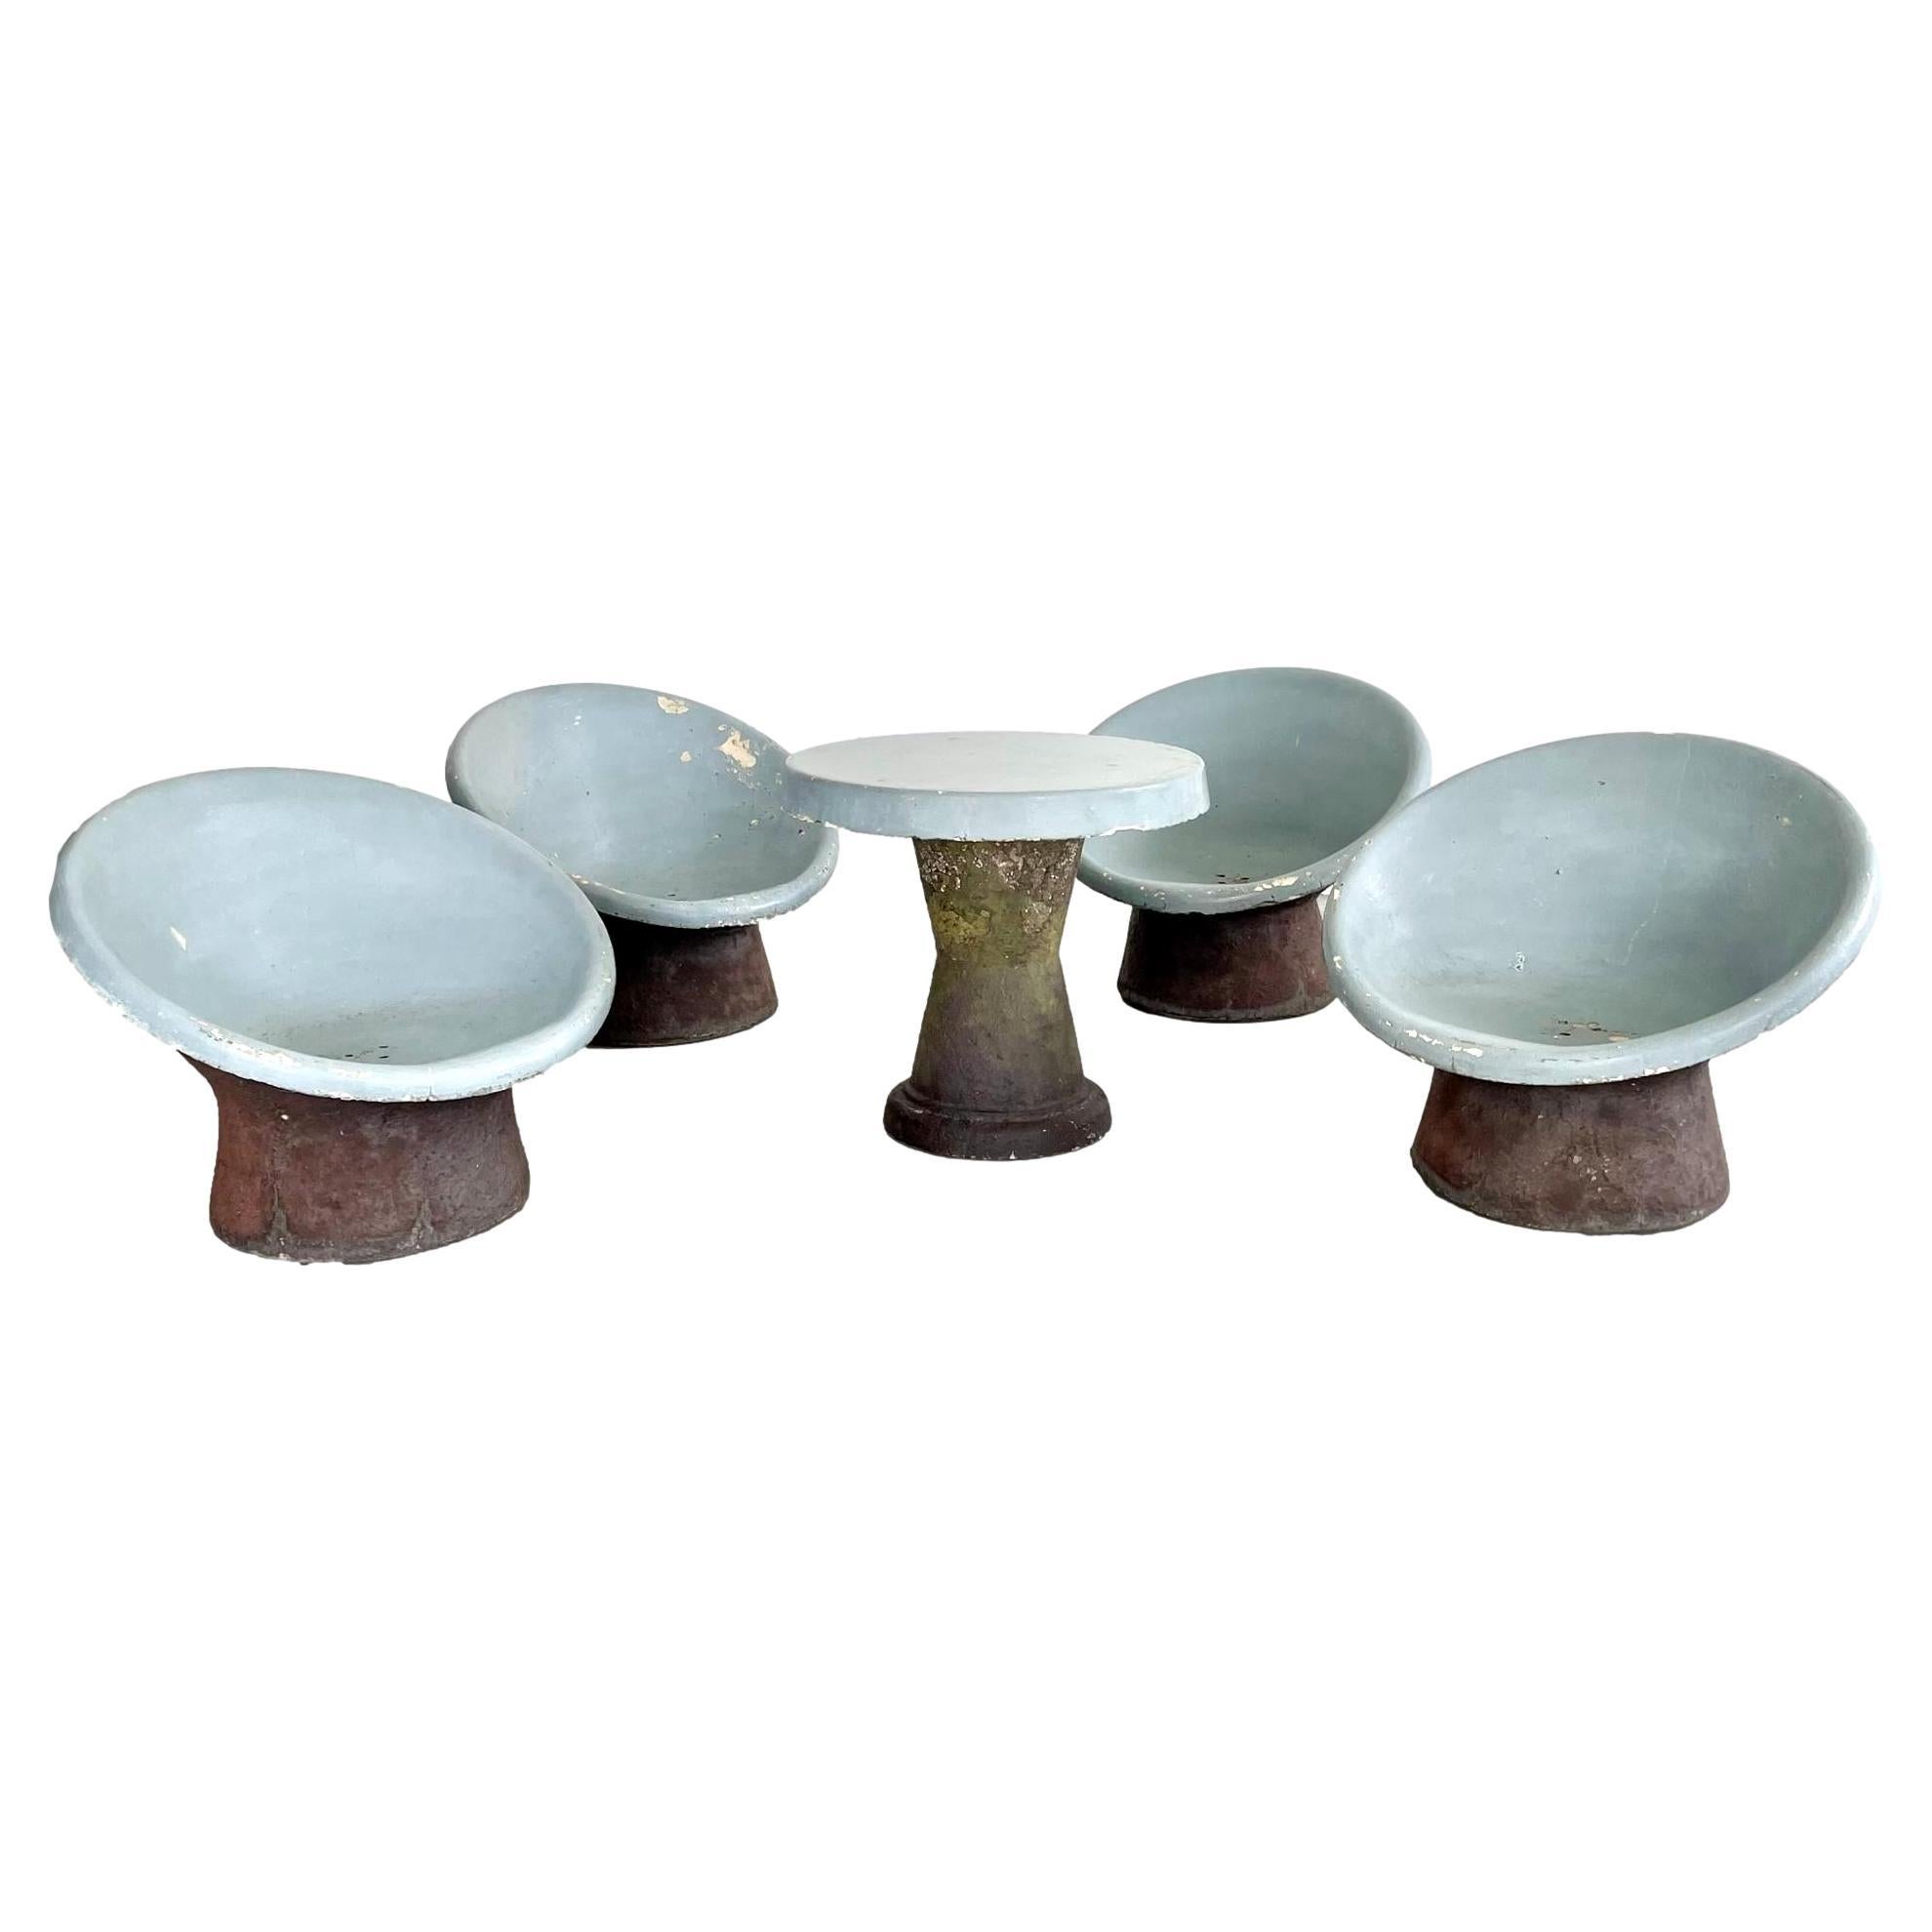 Sculptural Concrete Chairs and Table, 1960s, Switzerland